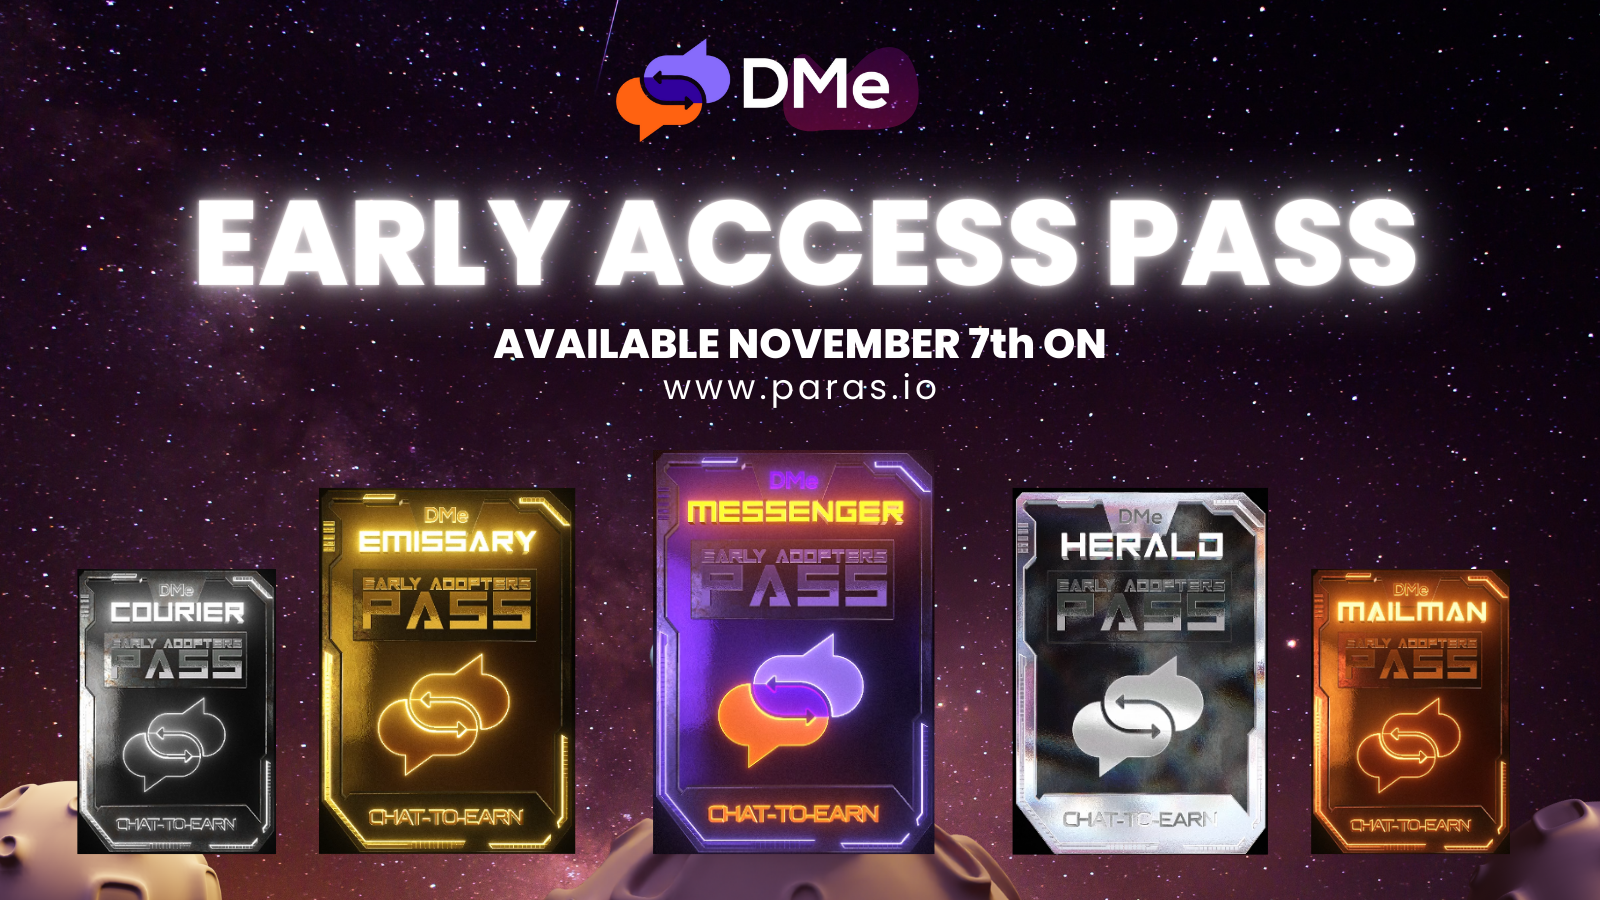 DMe - Early Access Pass